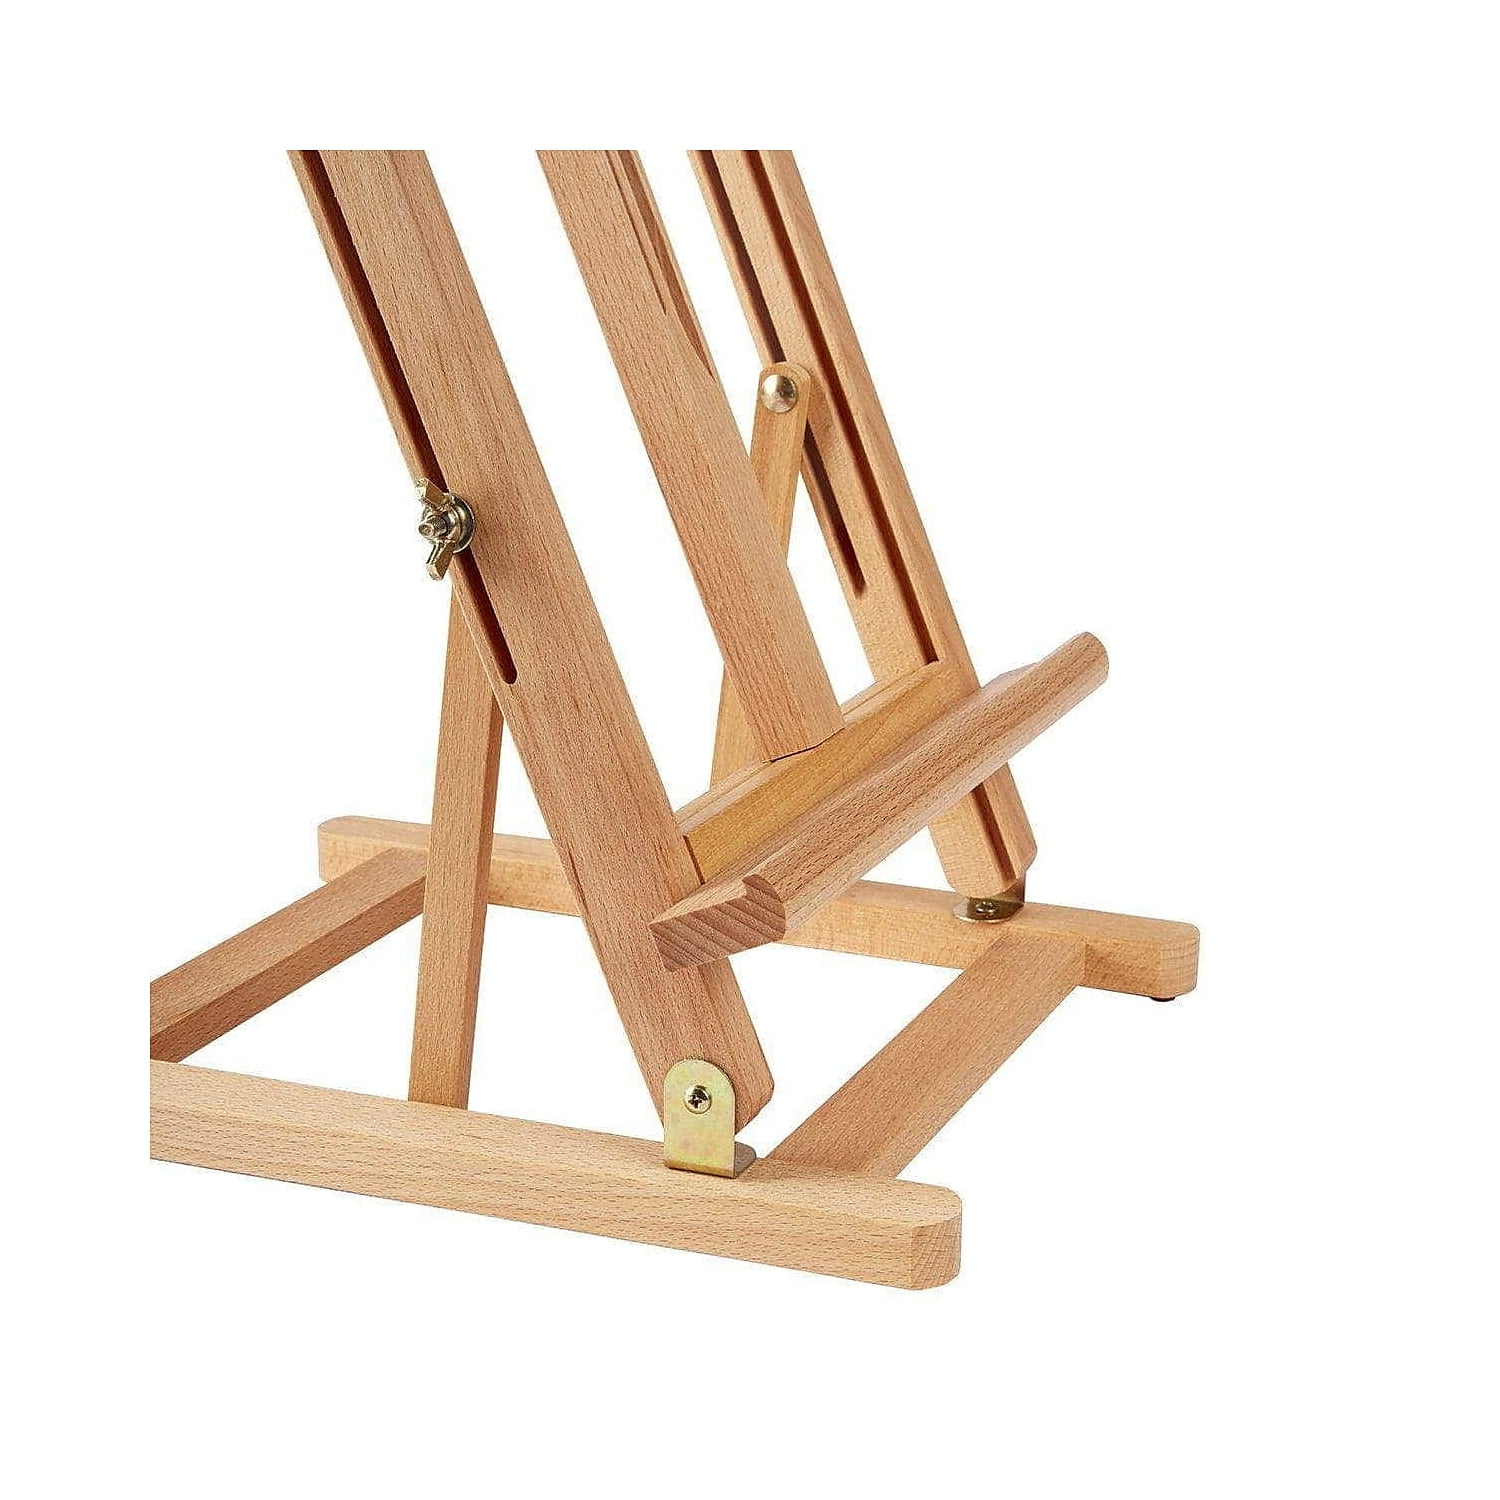 Small Tabletop Wooden H-Frame Studio Easel - Artists Adjustable Painting & Display  Easel, Easel - King Soopers